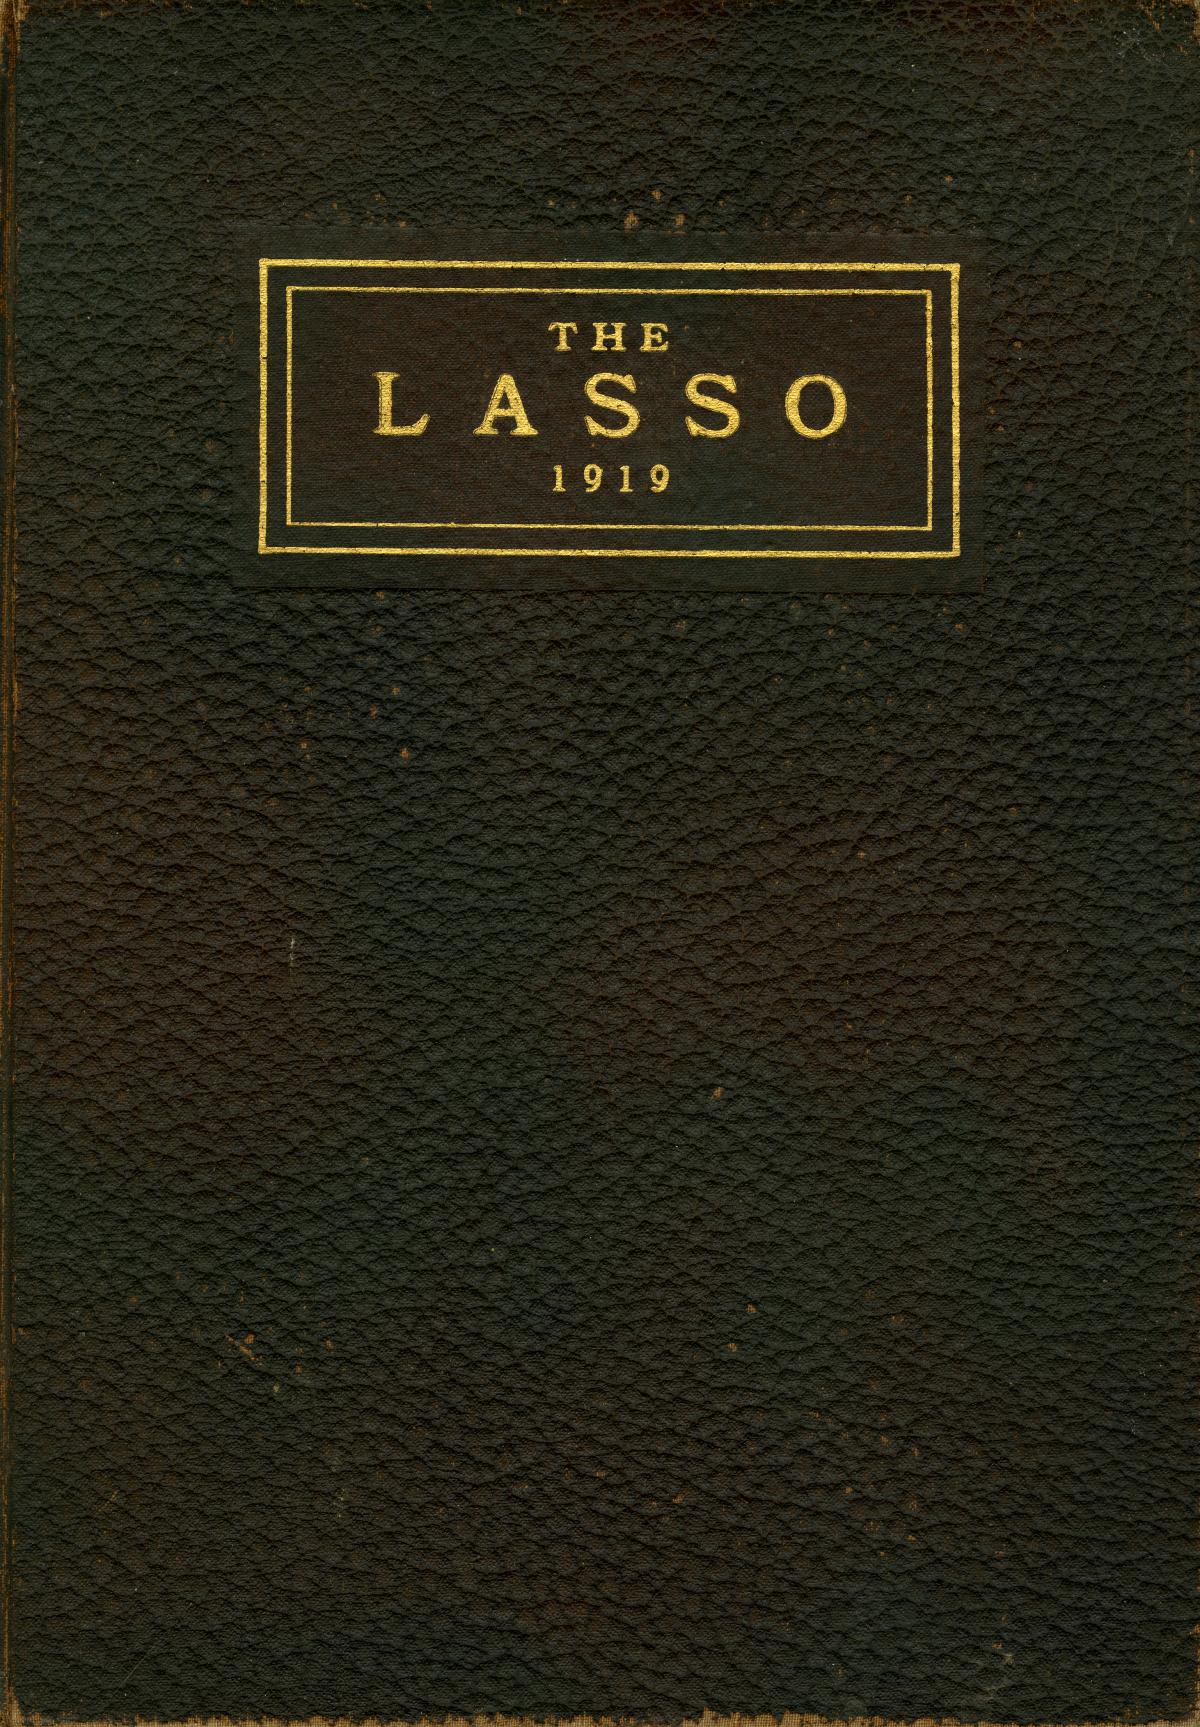 The Lasso, Yearbook of Howard Payne College, 1919
                                                
                                                    Front Cover
                                                